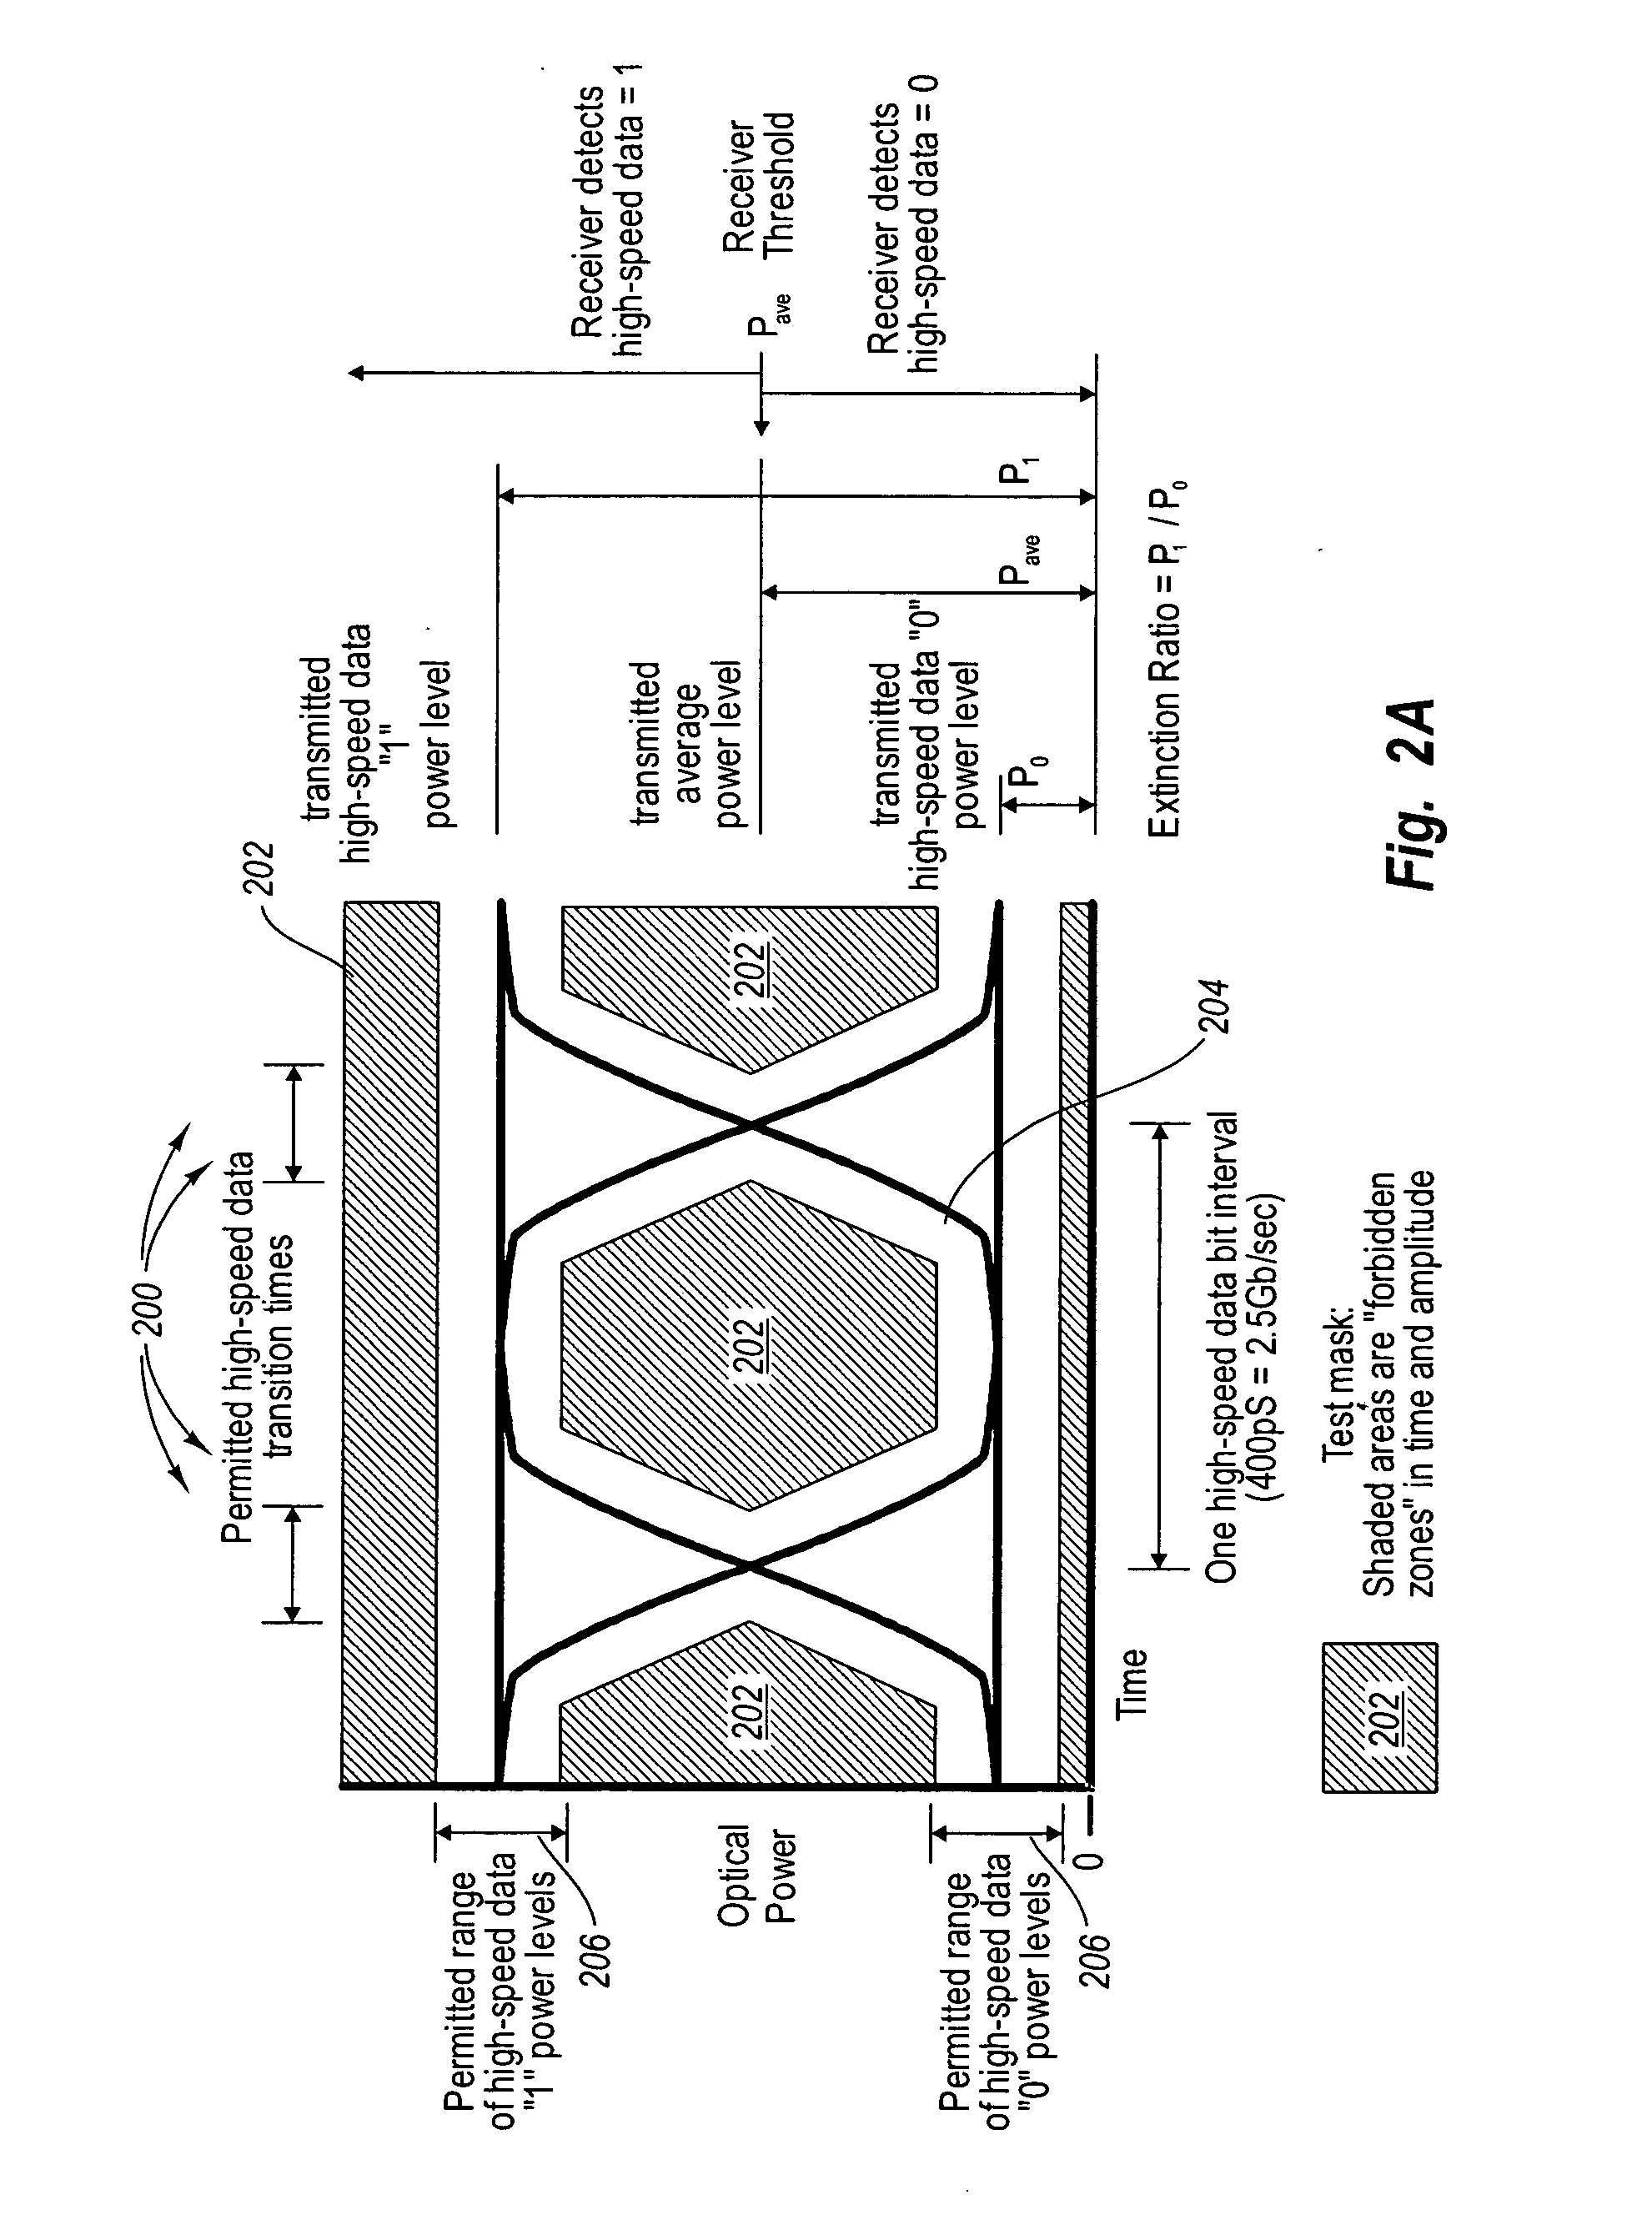 Out-of-band data communication between network transceivers